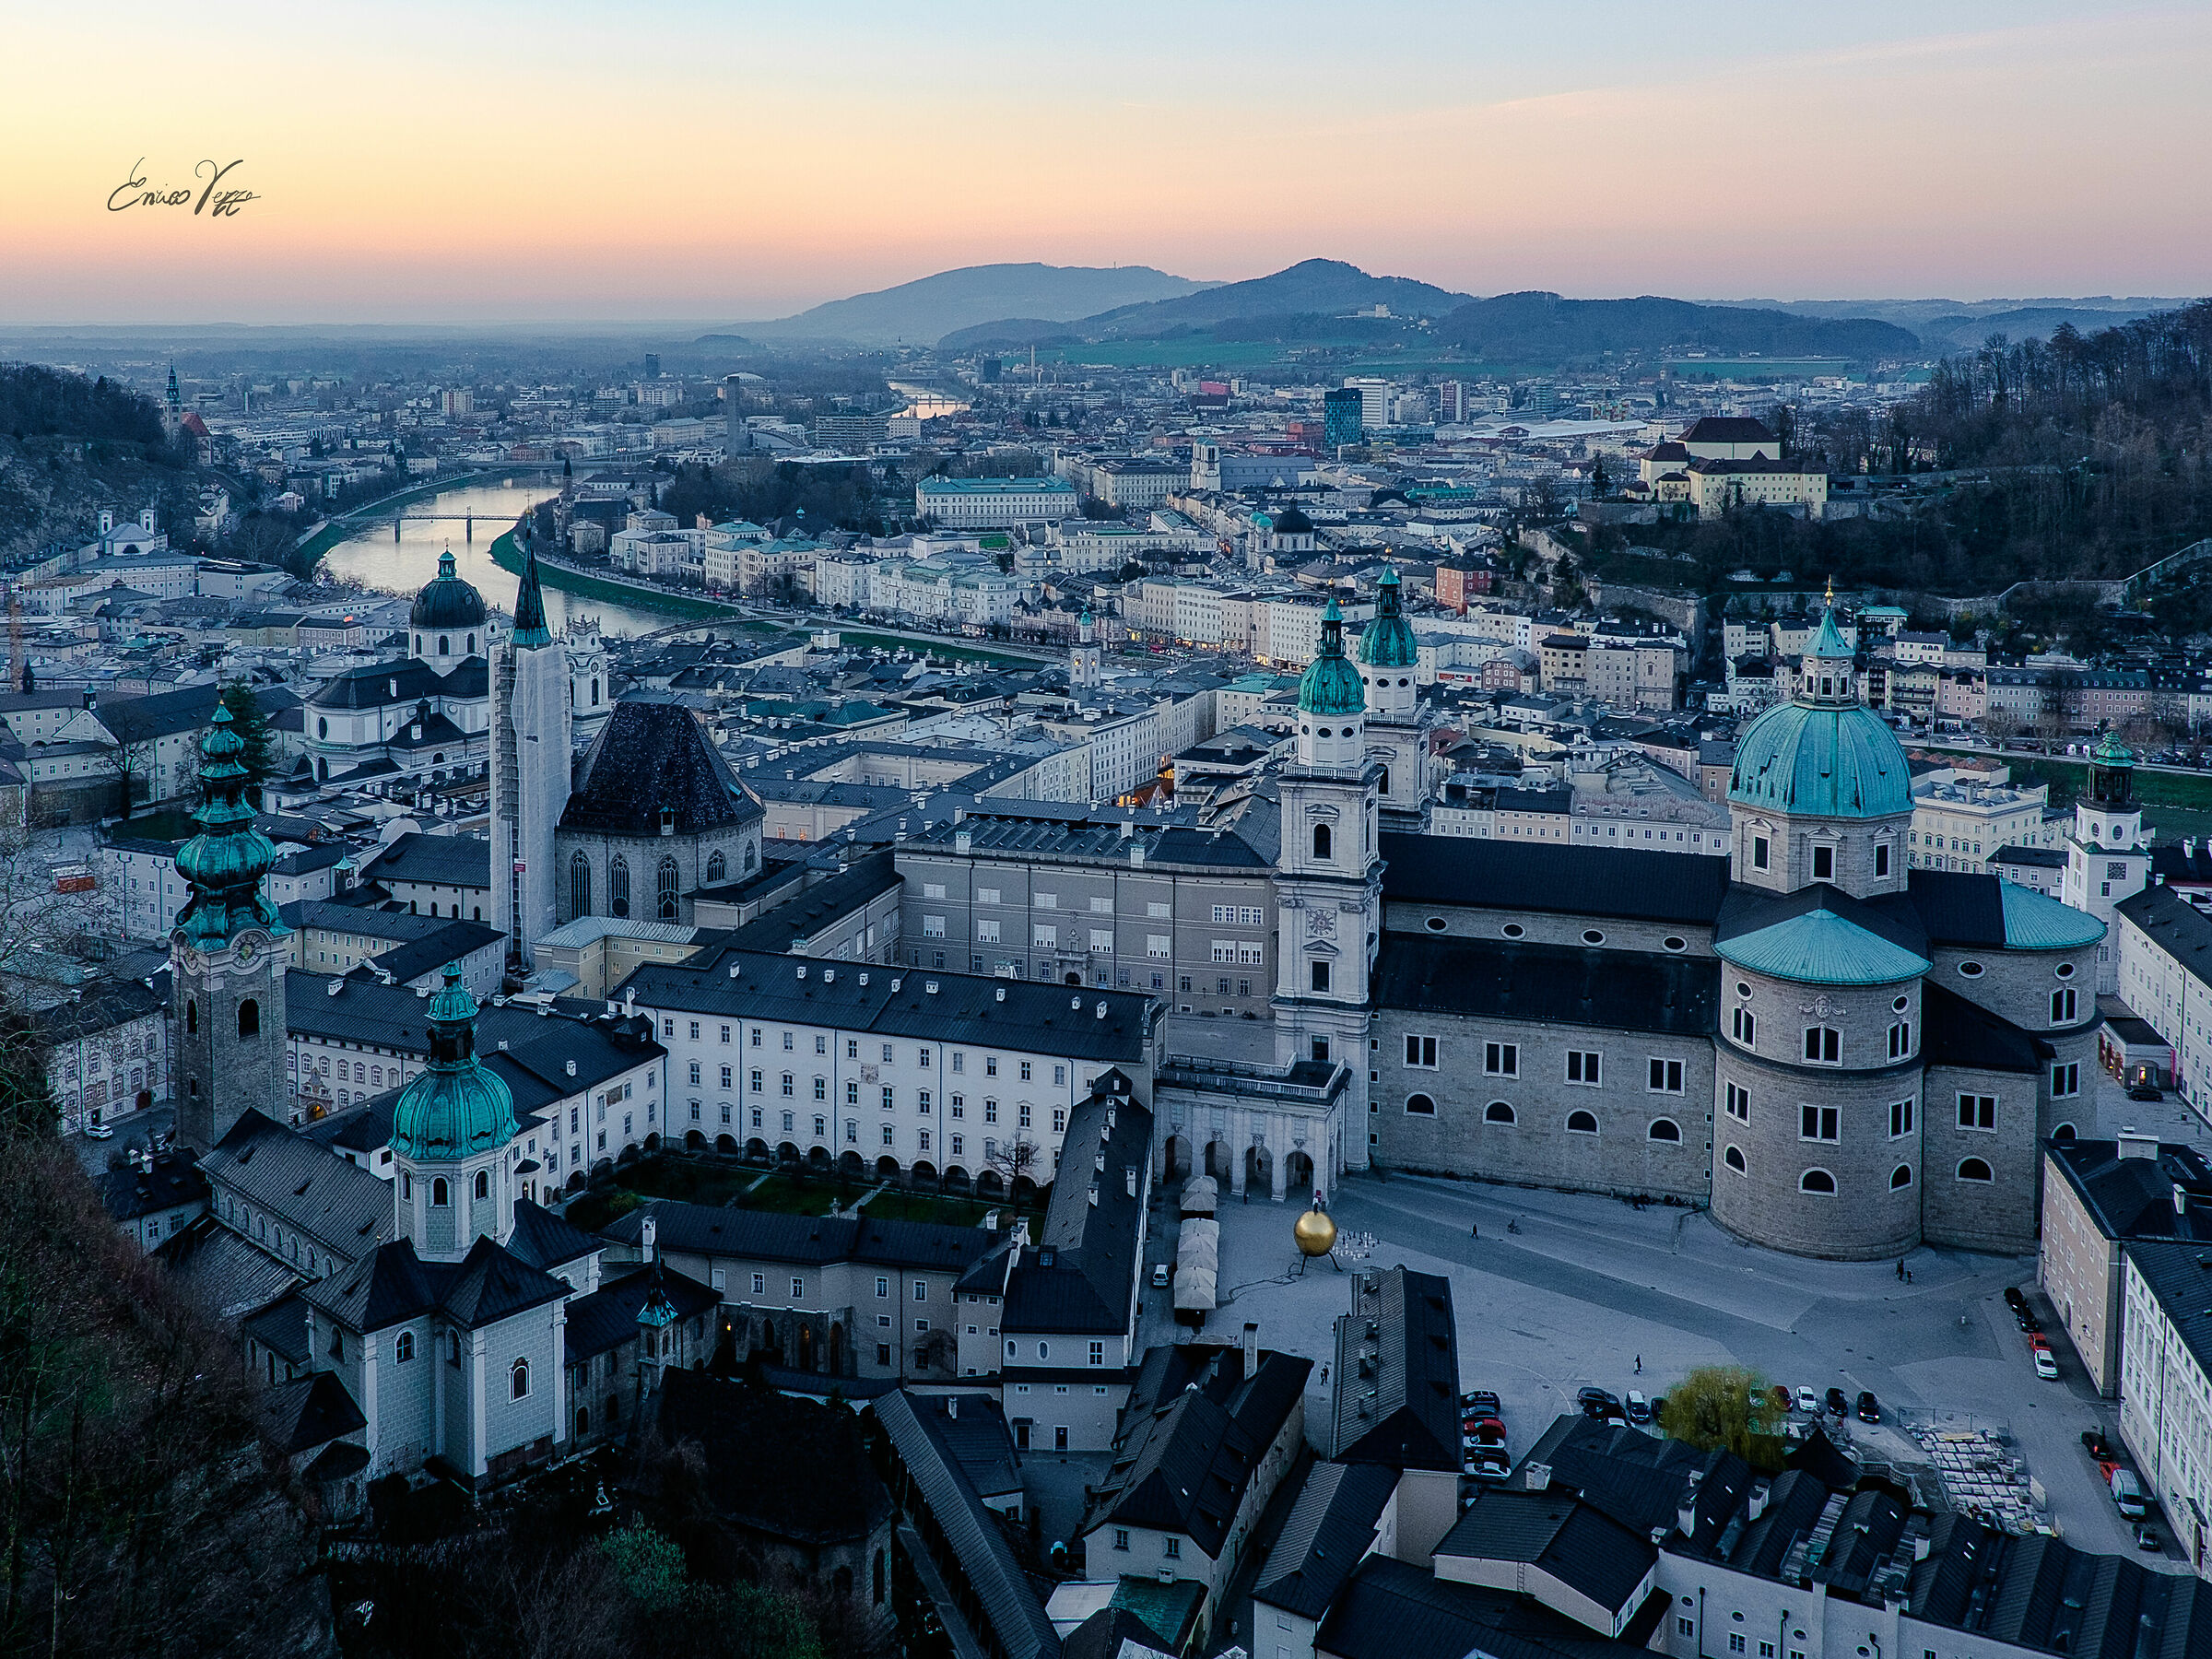 Salzburg from the top...